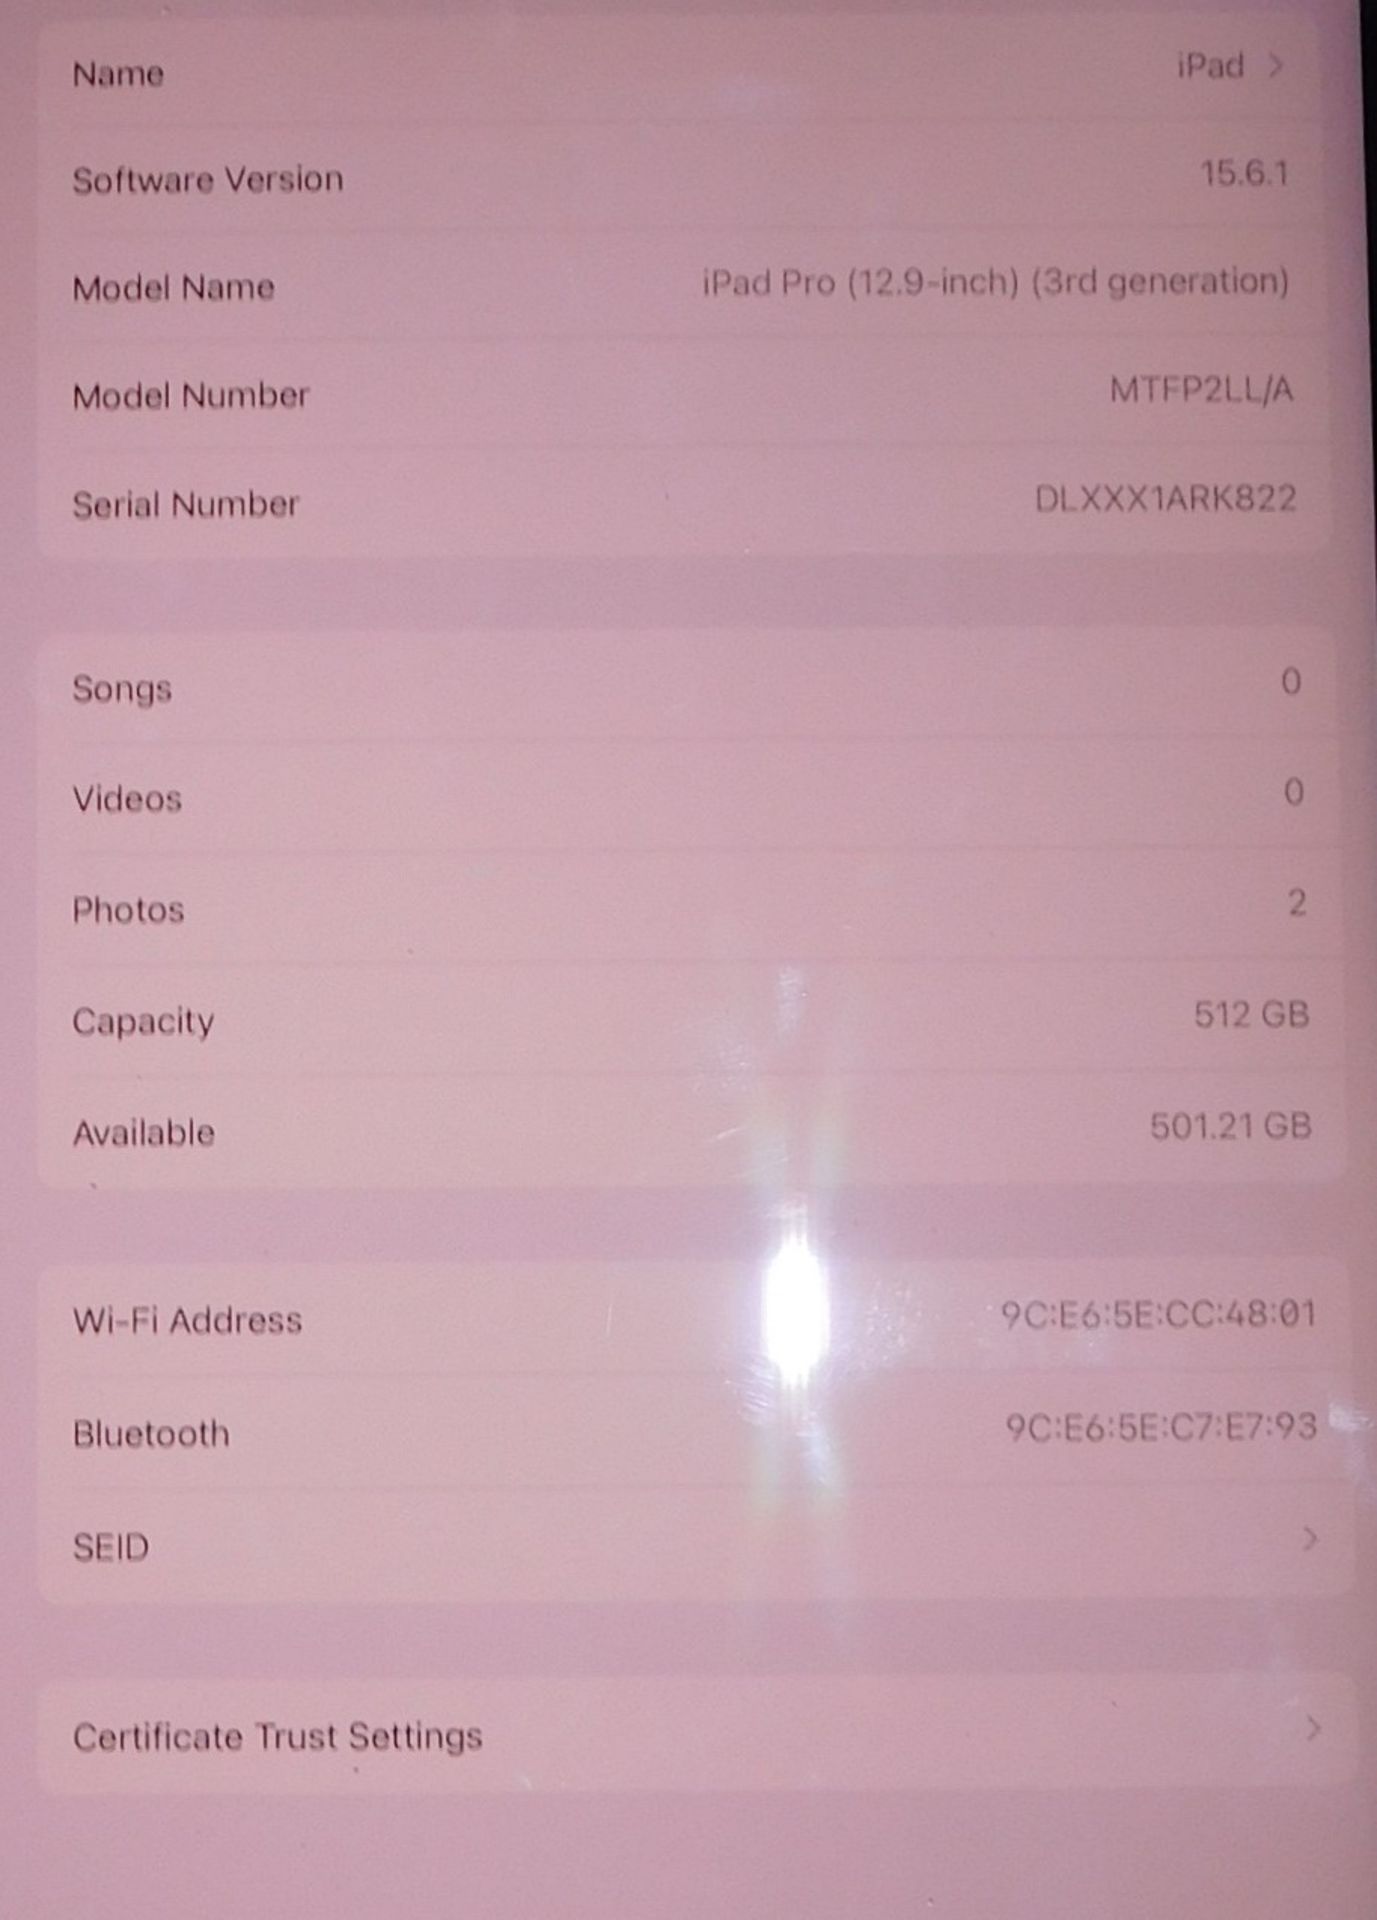 Apple iPad Pro, 12.9 inch, 3rd Generation, A1876, Serial Number DLXXX1ARK822, 512 GB Capacity ( - Image 4 of 4